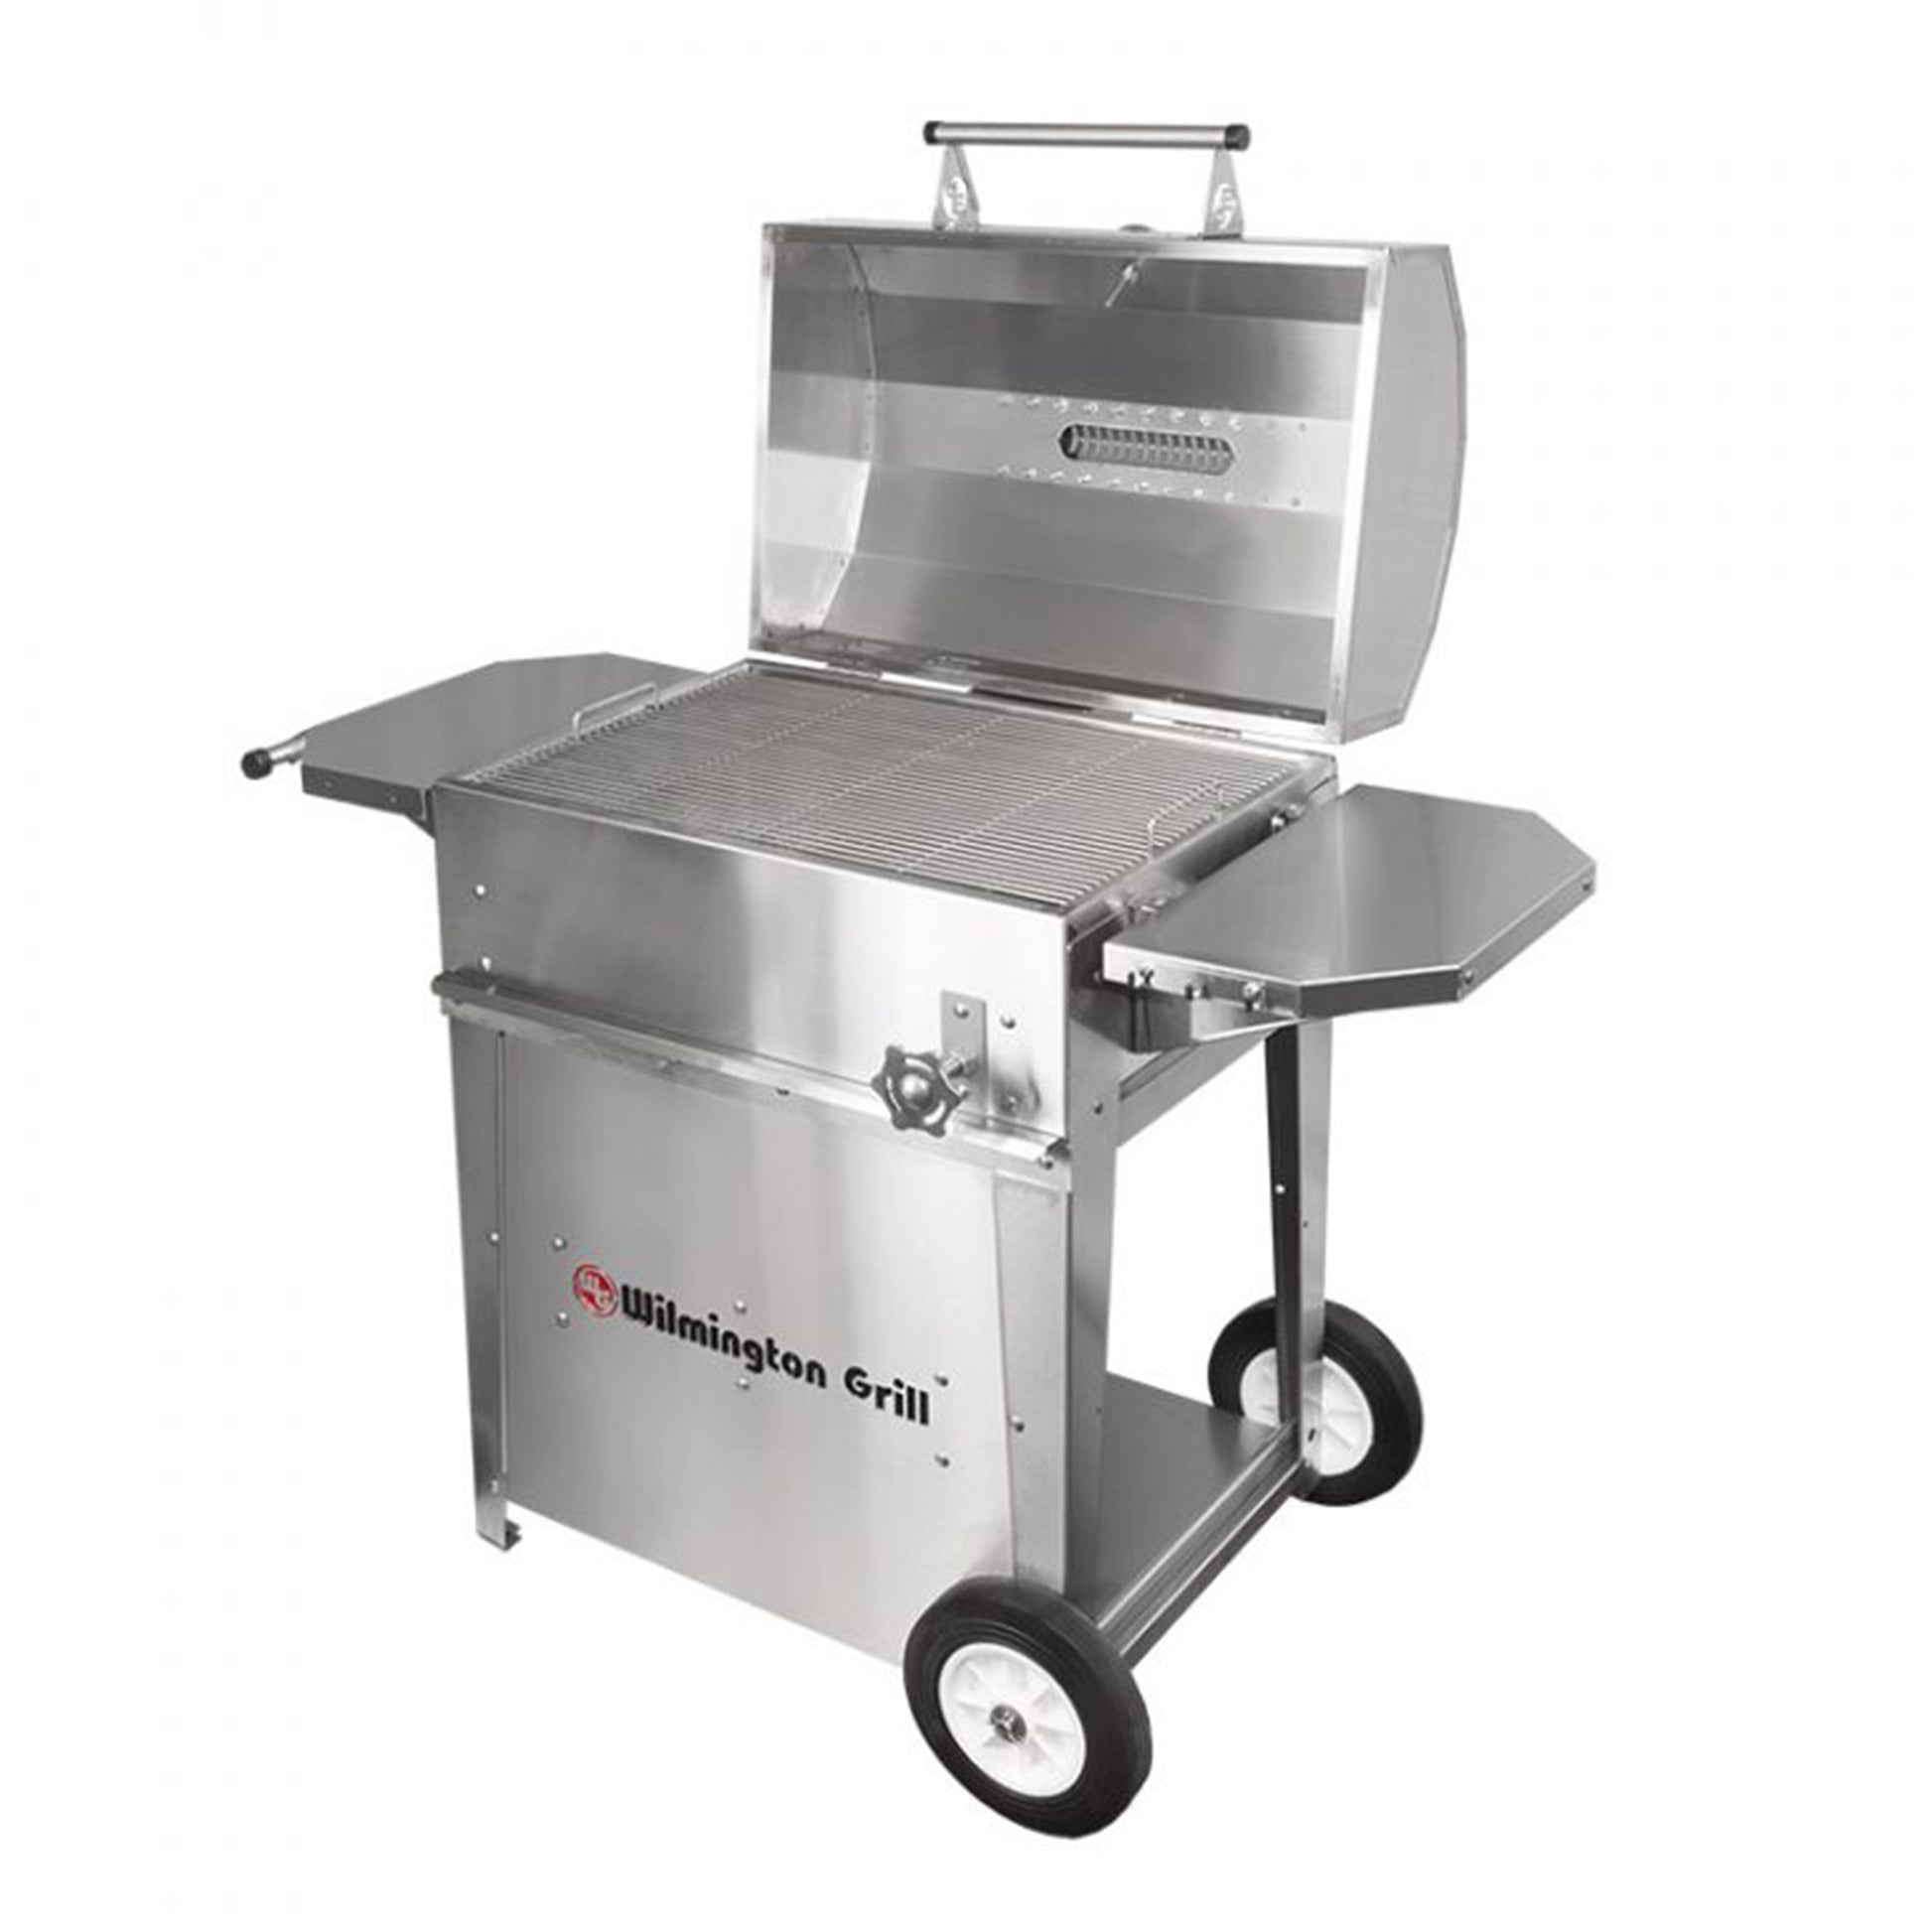 Wilmington Grill Charcoal Free Standing Grill